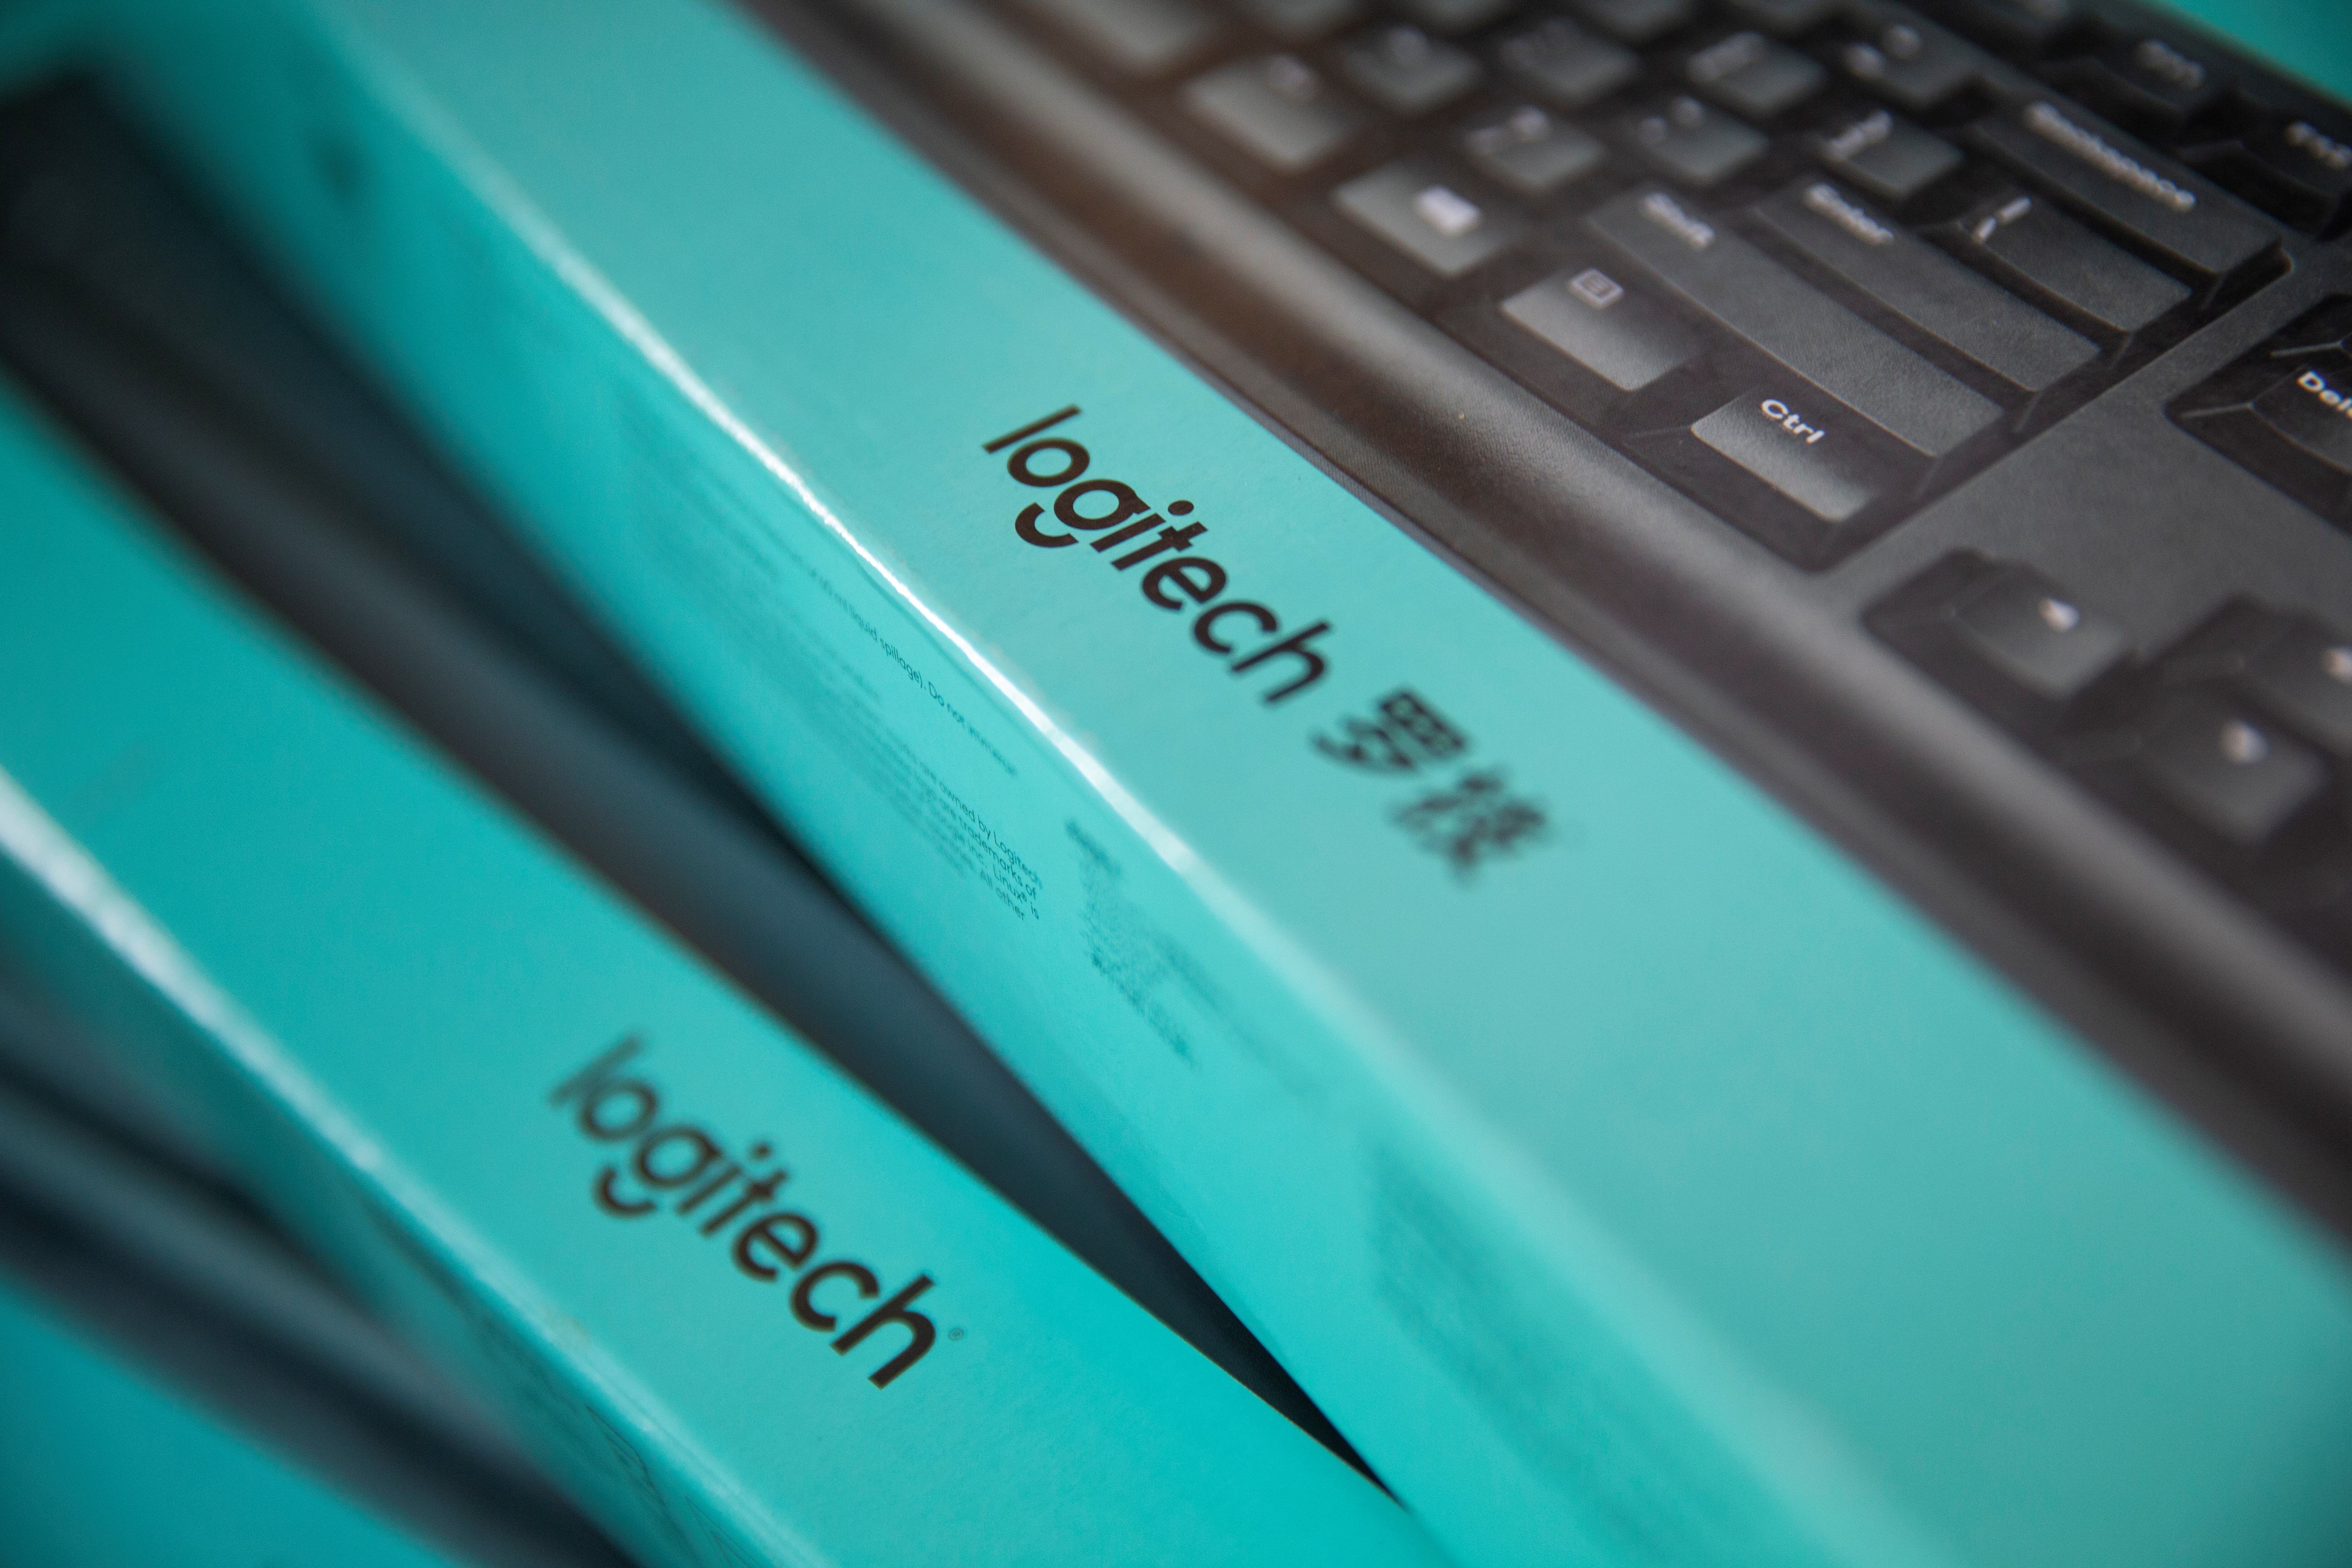 Logitech keyboards are seen in the computer shop in Zenica